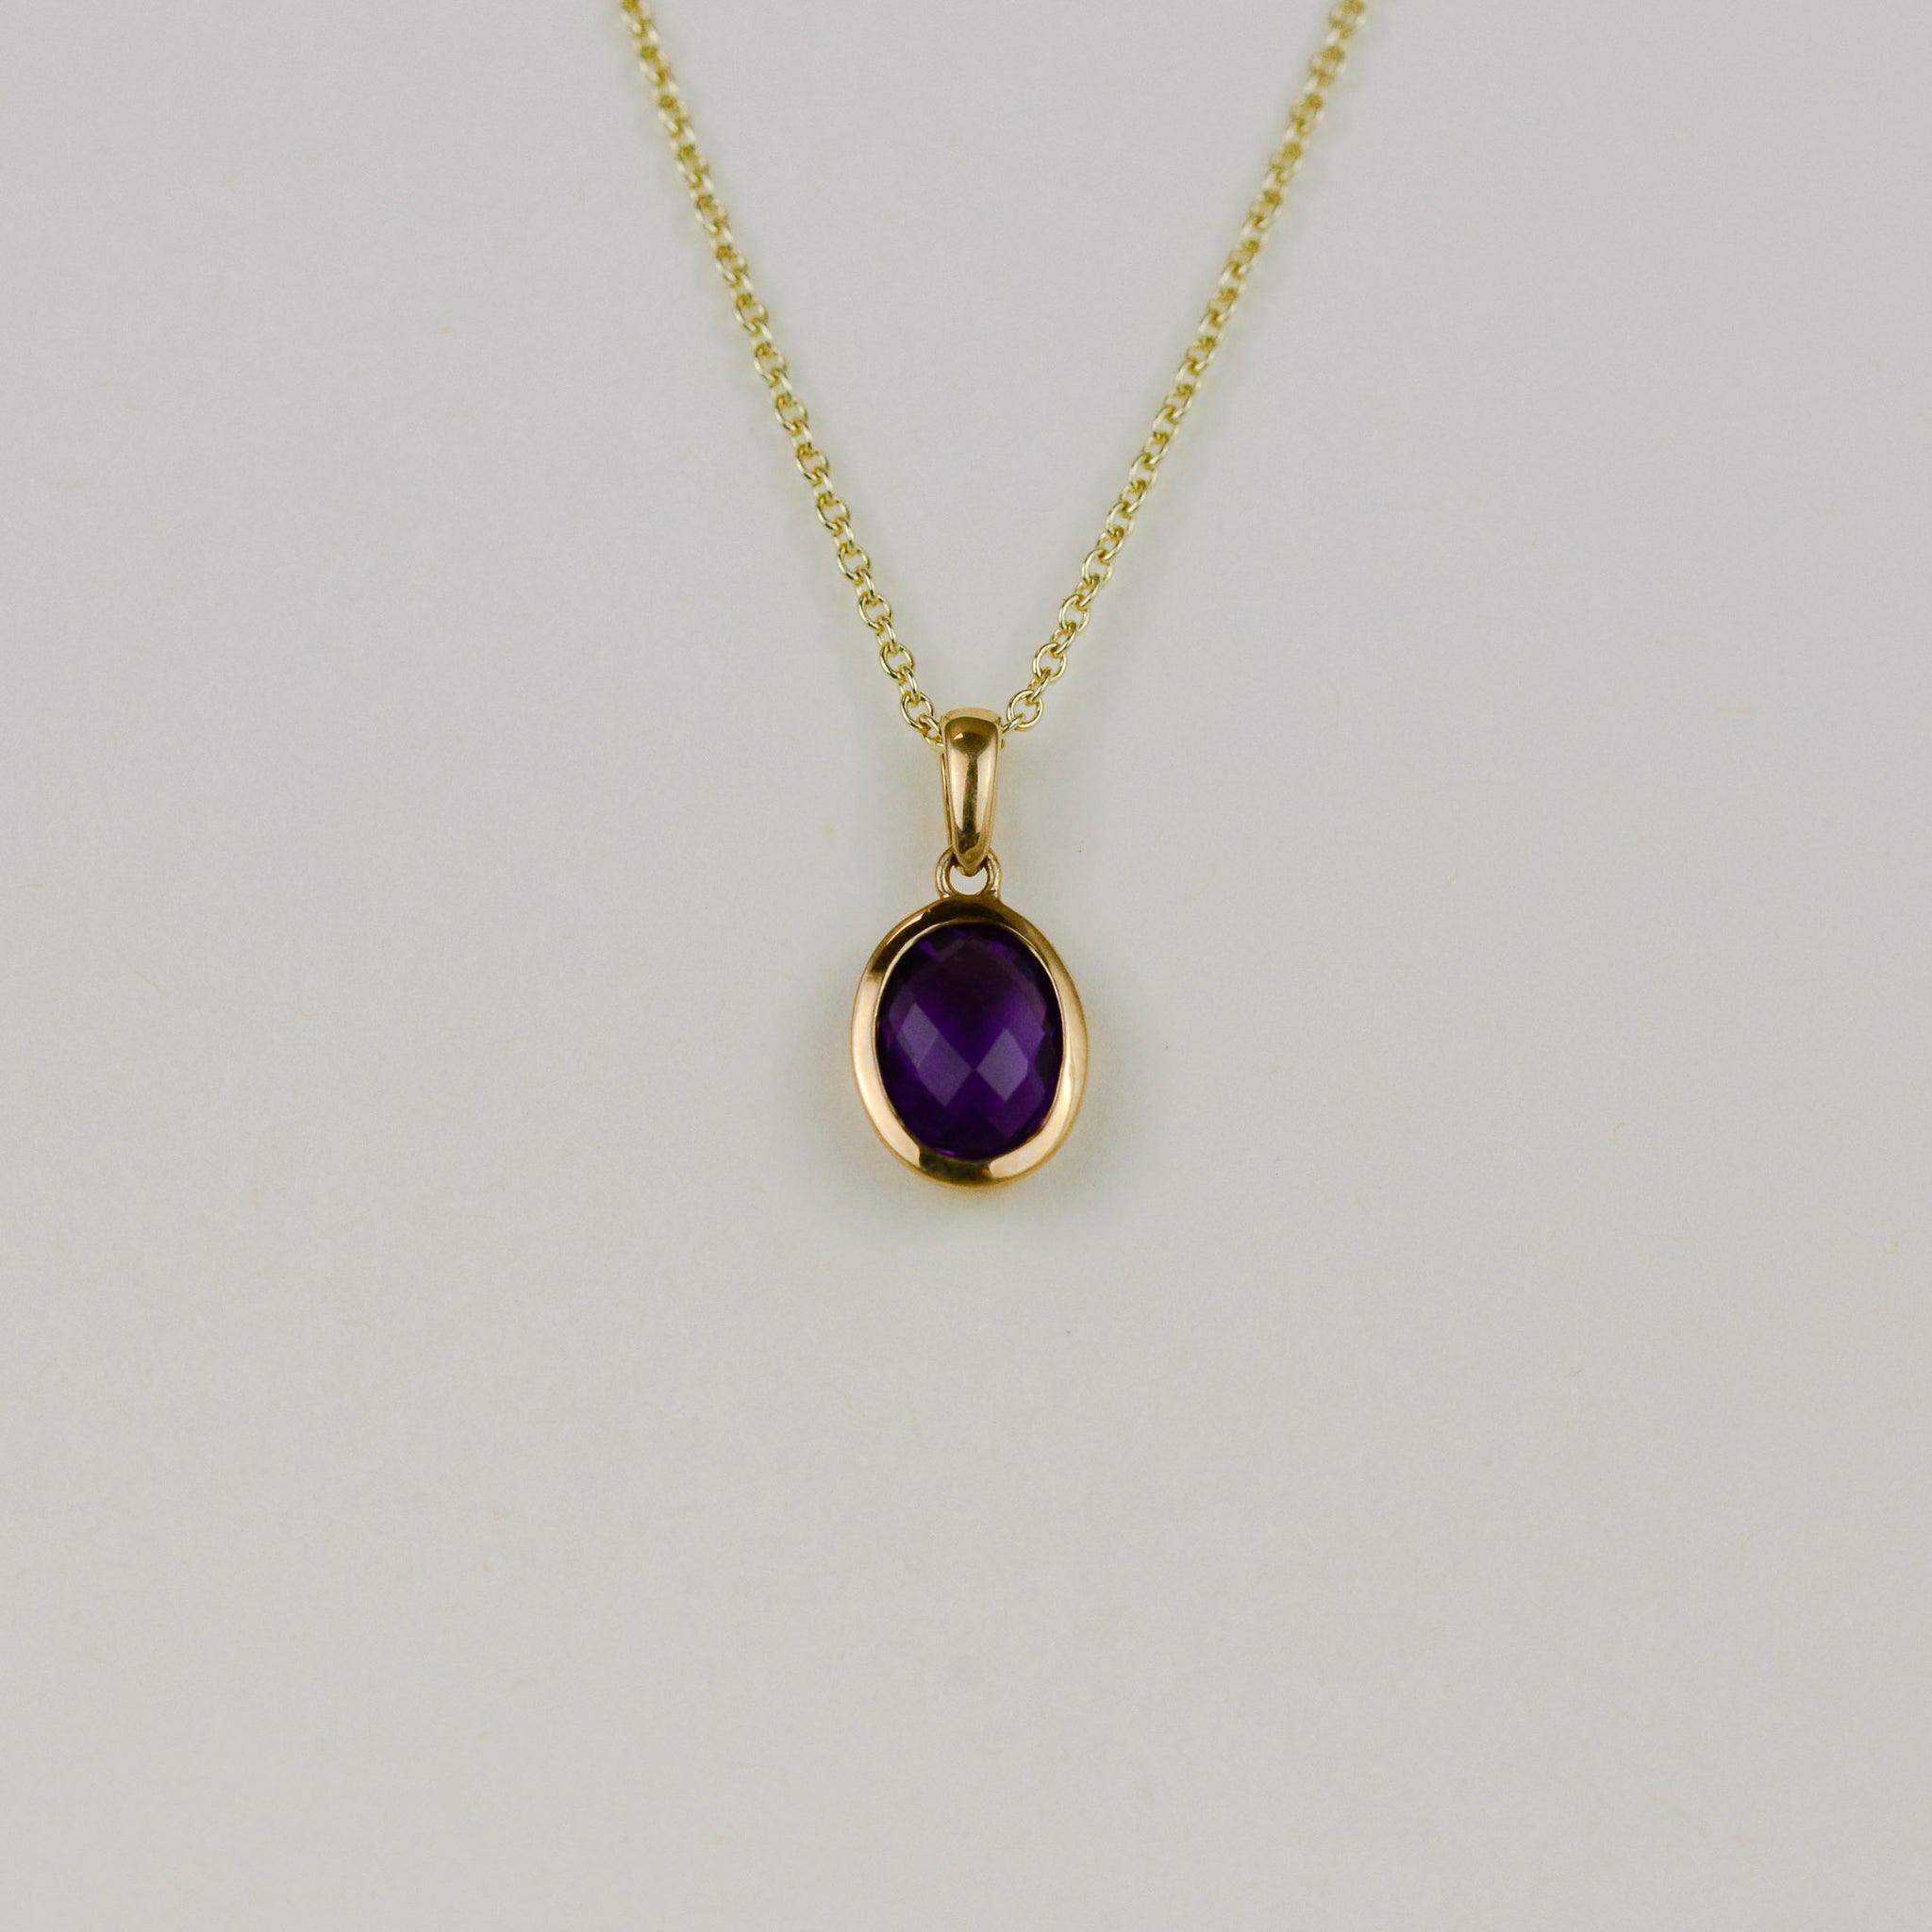 9ct Yellow Gold 1.14ct Oval Cabachon Amethyst Pendant